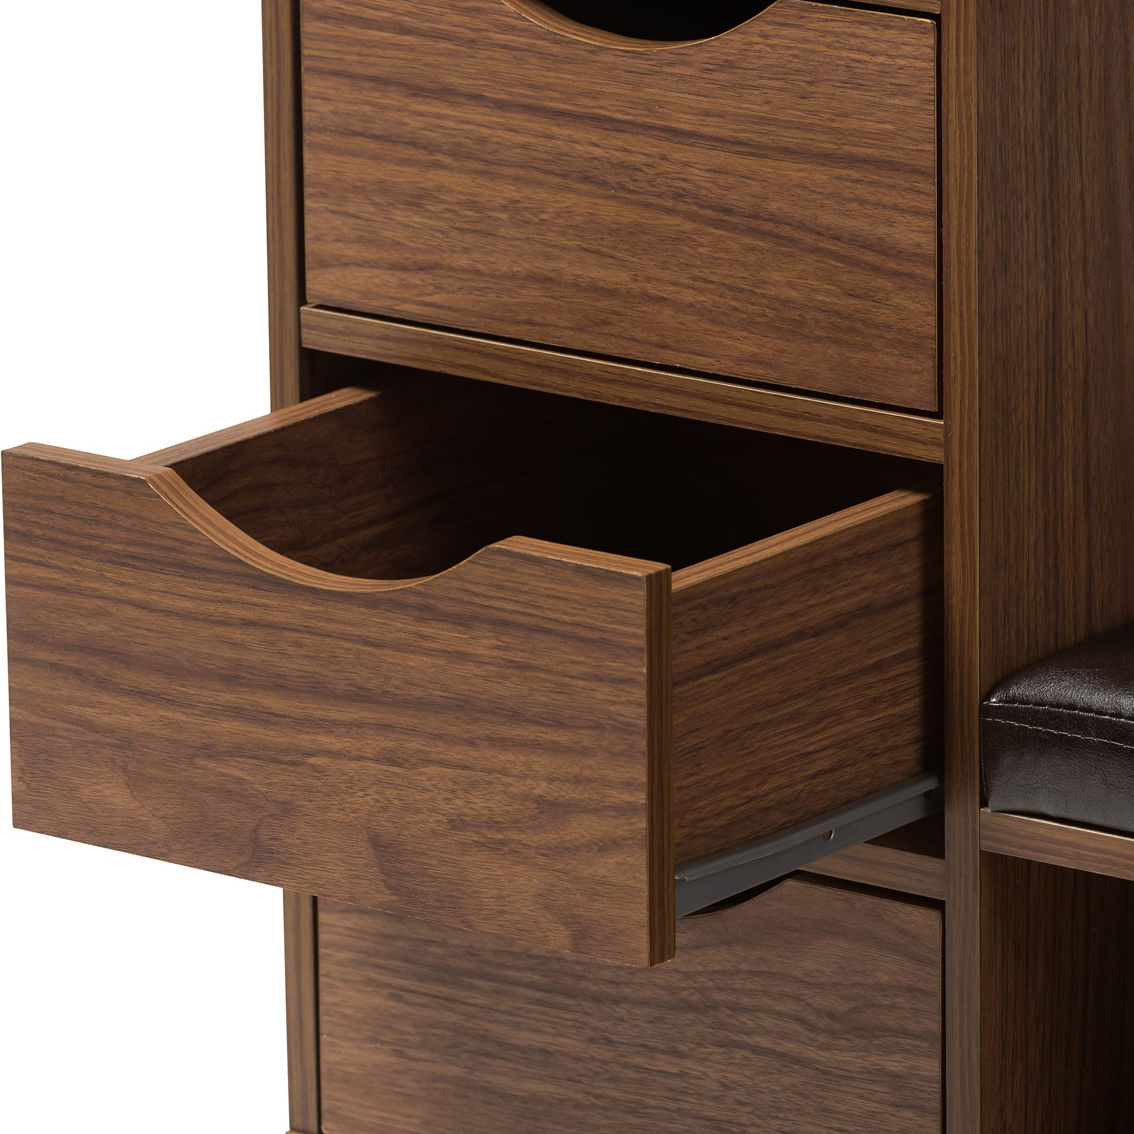 Baxton Studio Arielle Walnut Wood 3-Drawer Shoe Storage With Faux Leather Bench - Image 4 of 5